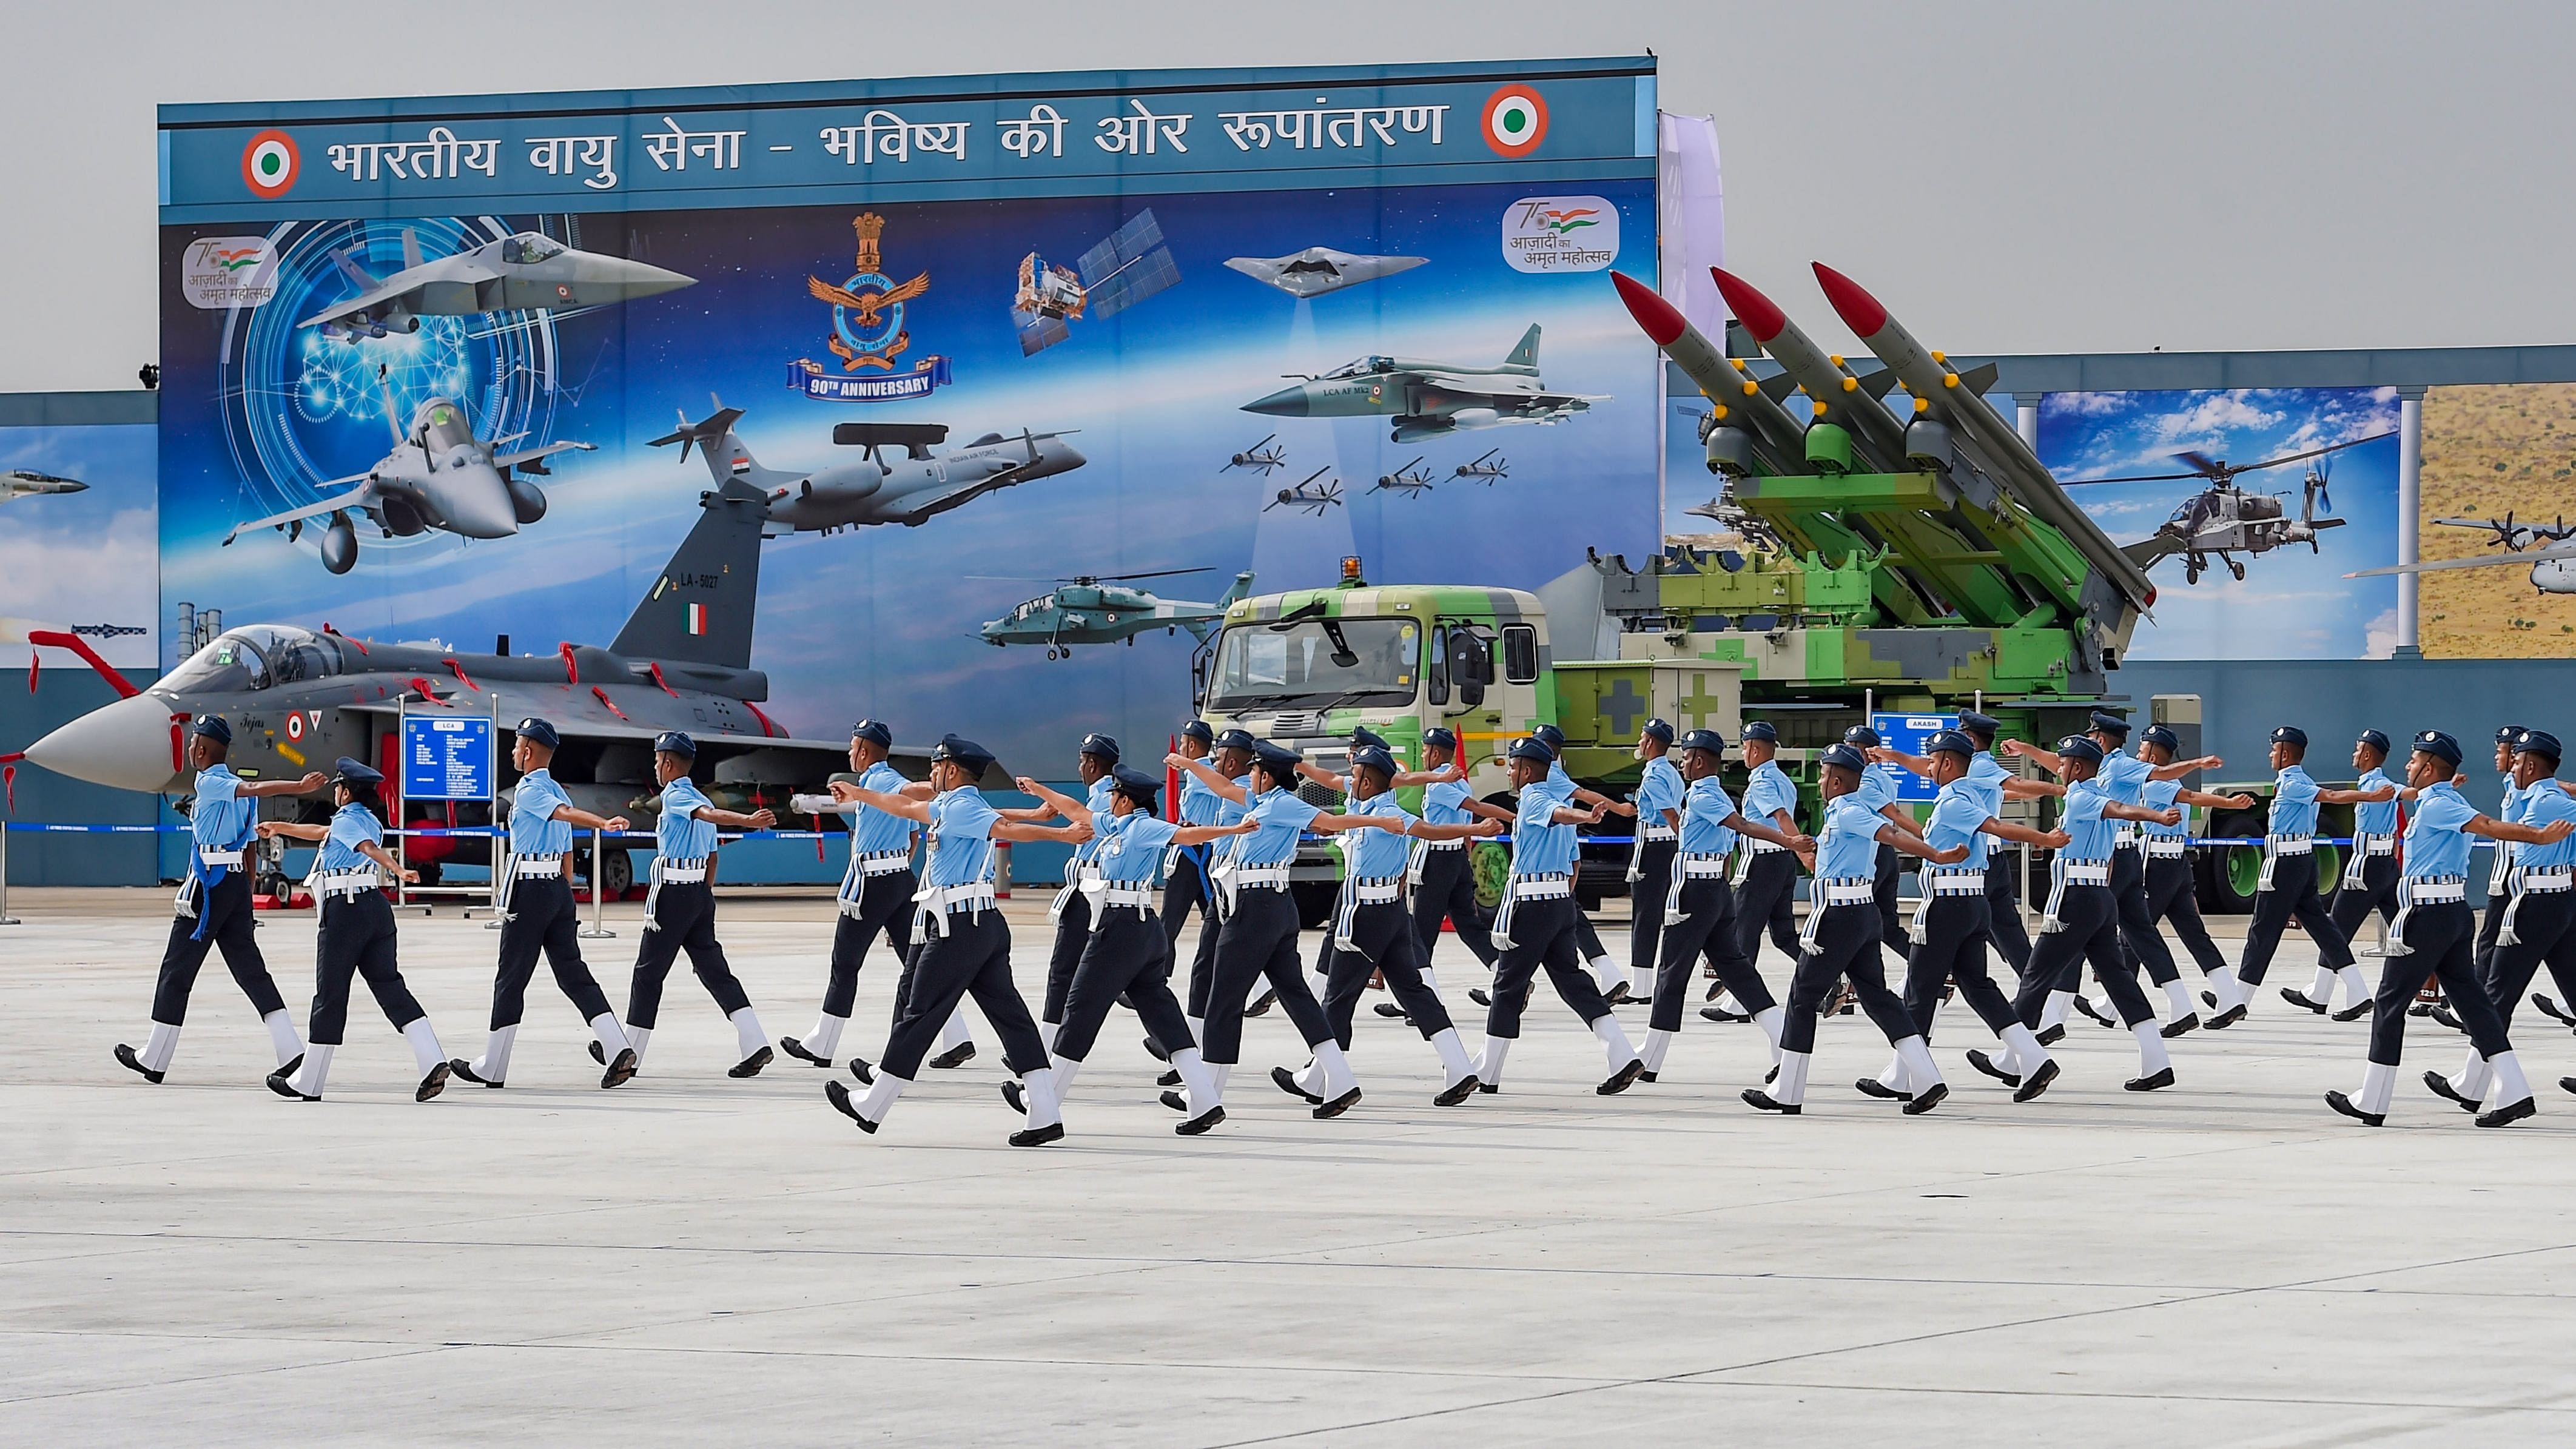 Air Force personnel perform a march-past during 90th anniversary celebrations of Indian Air Force (IAF). Credit: PTI Photo